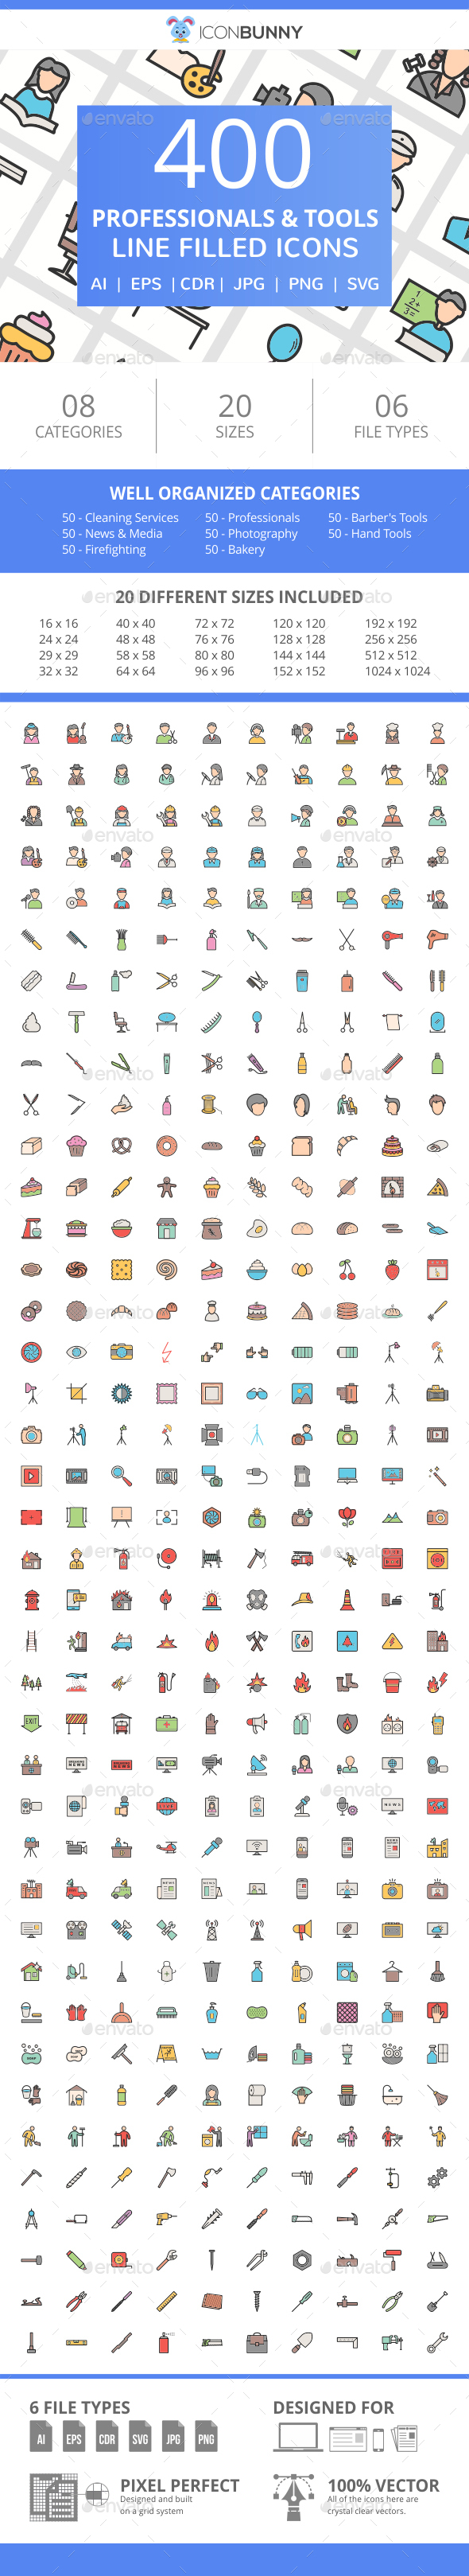 400 Professionals & their tools Filled Line Icons